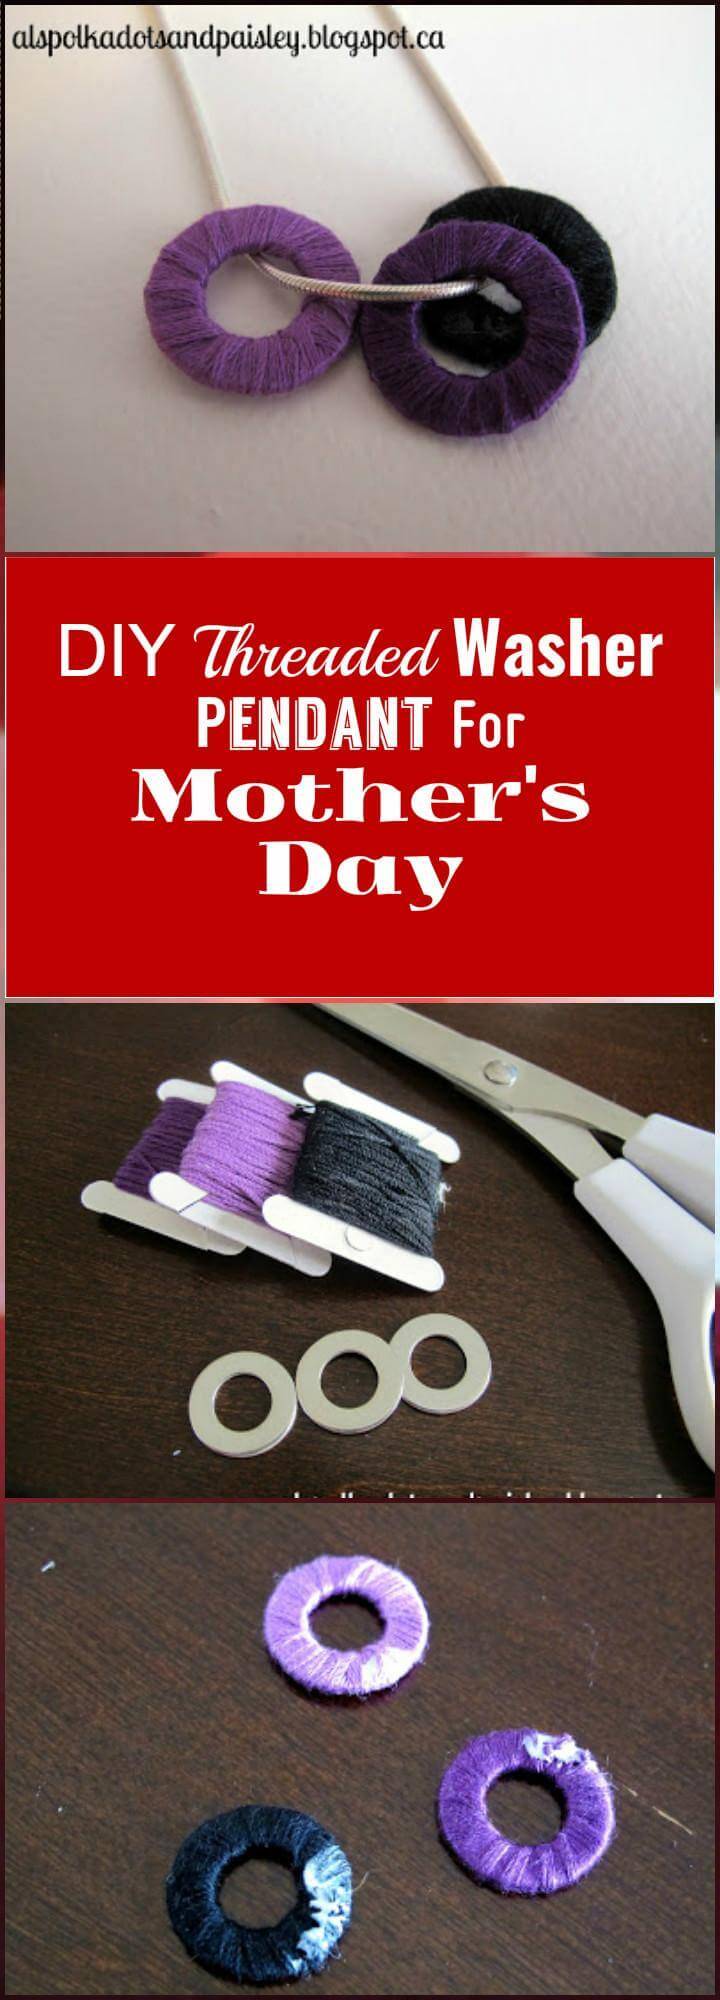 DIY threaded washer pendant for Mother's Day